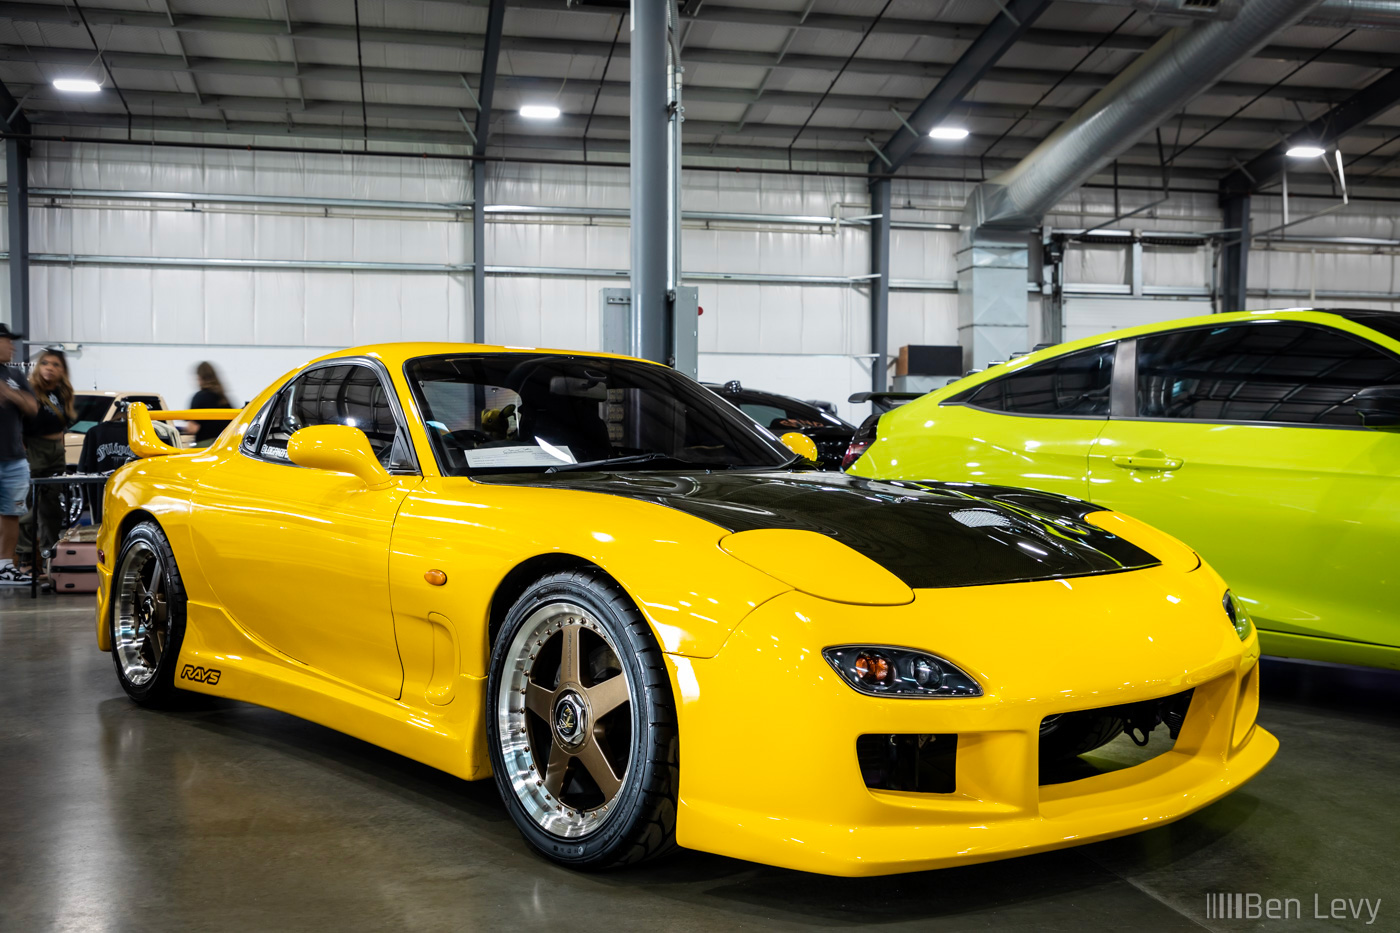 Yellow FD RX-7 at Cars and Culture Car Show